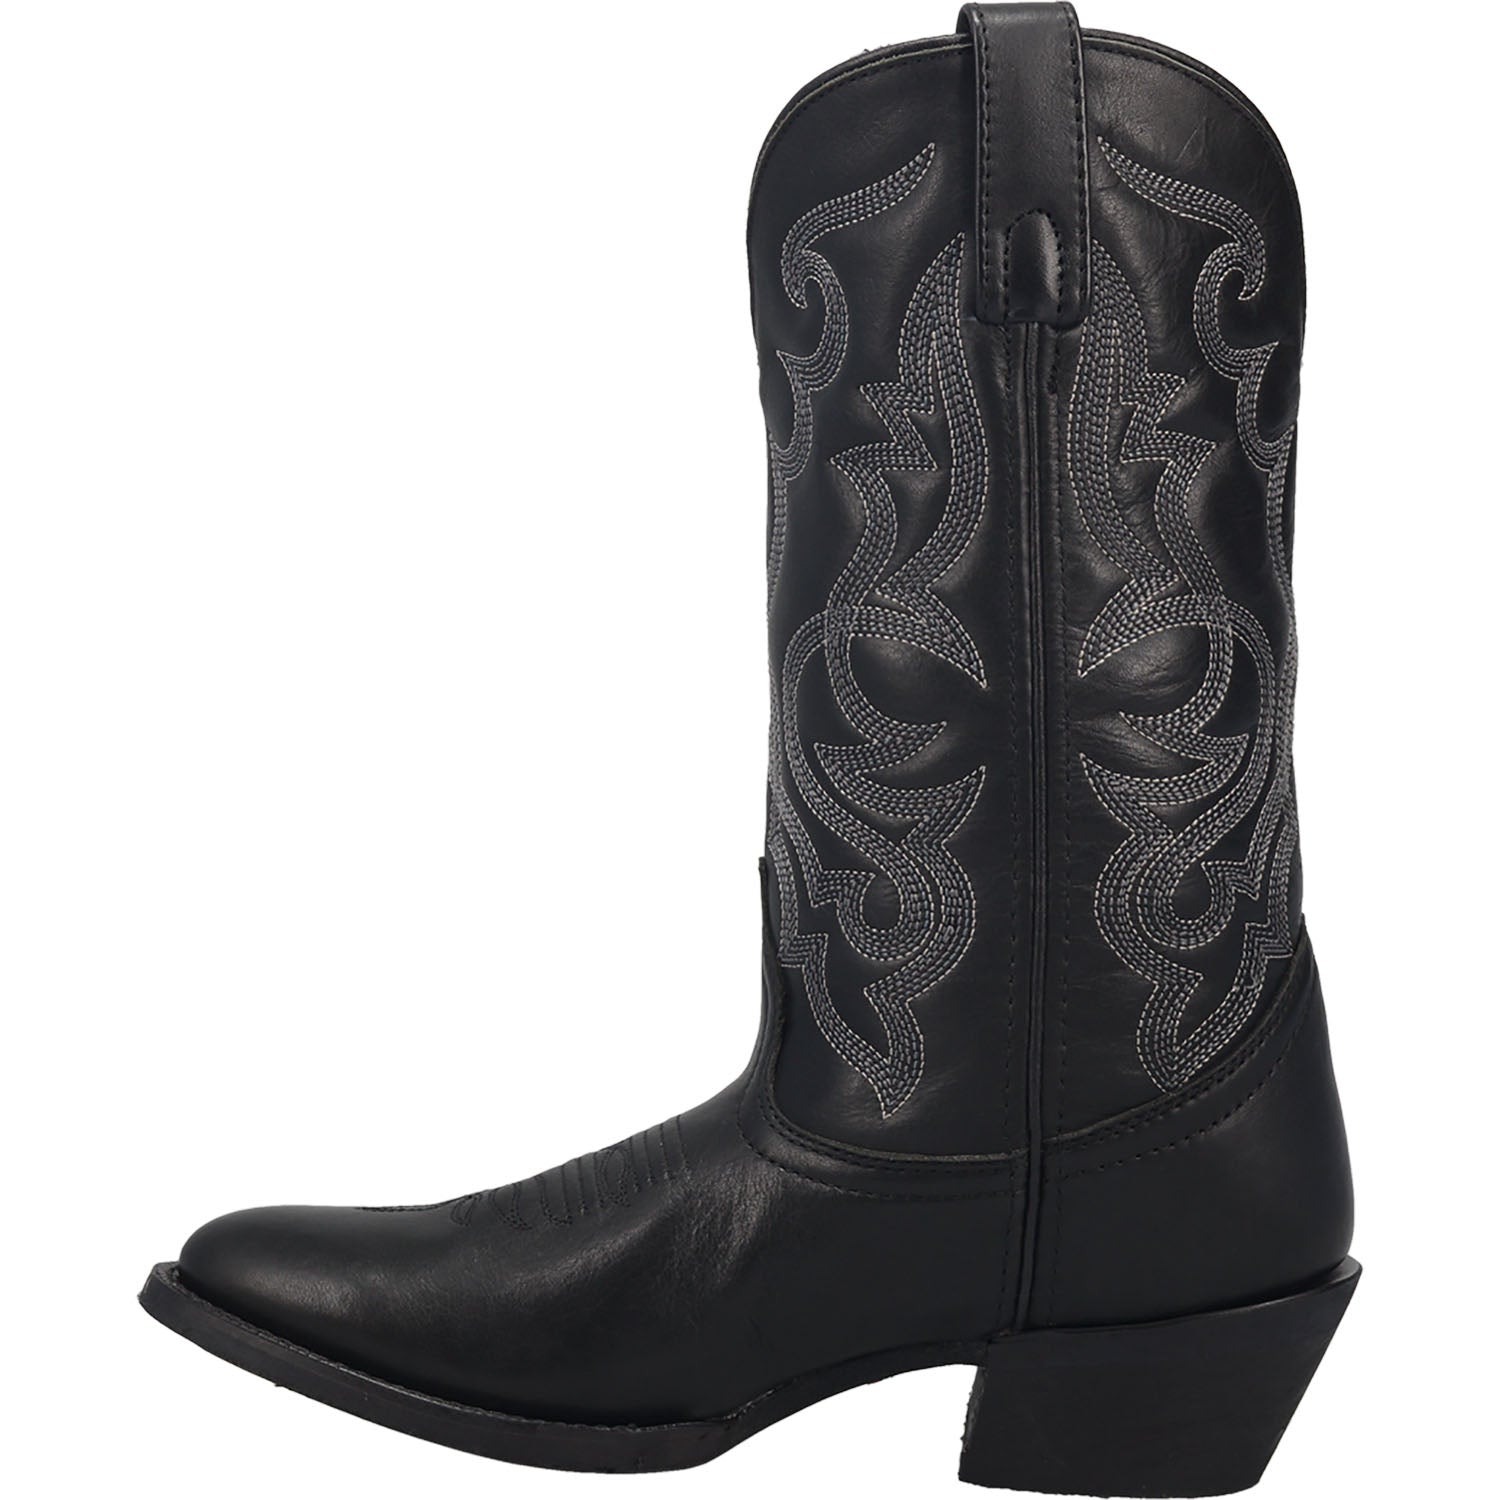 Laredo Womens Maddie Cowboy Boots Leather Black – The Western Company